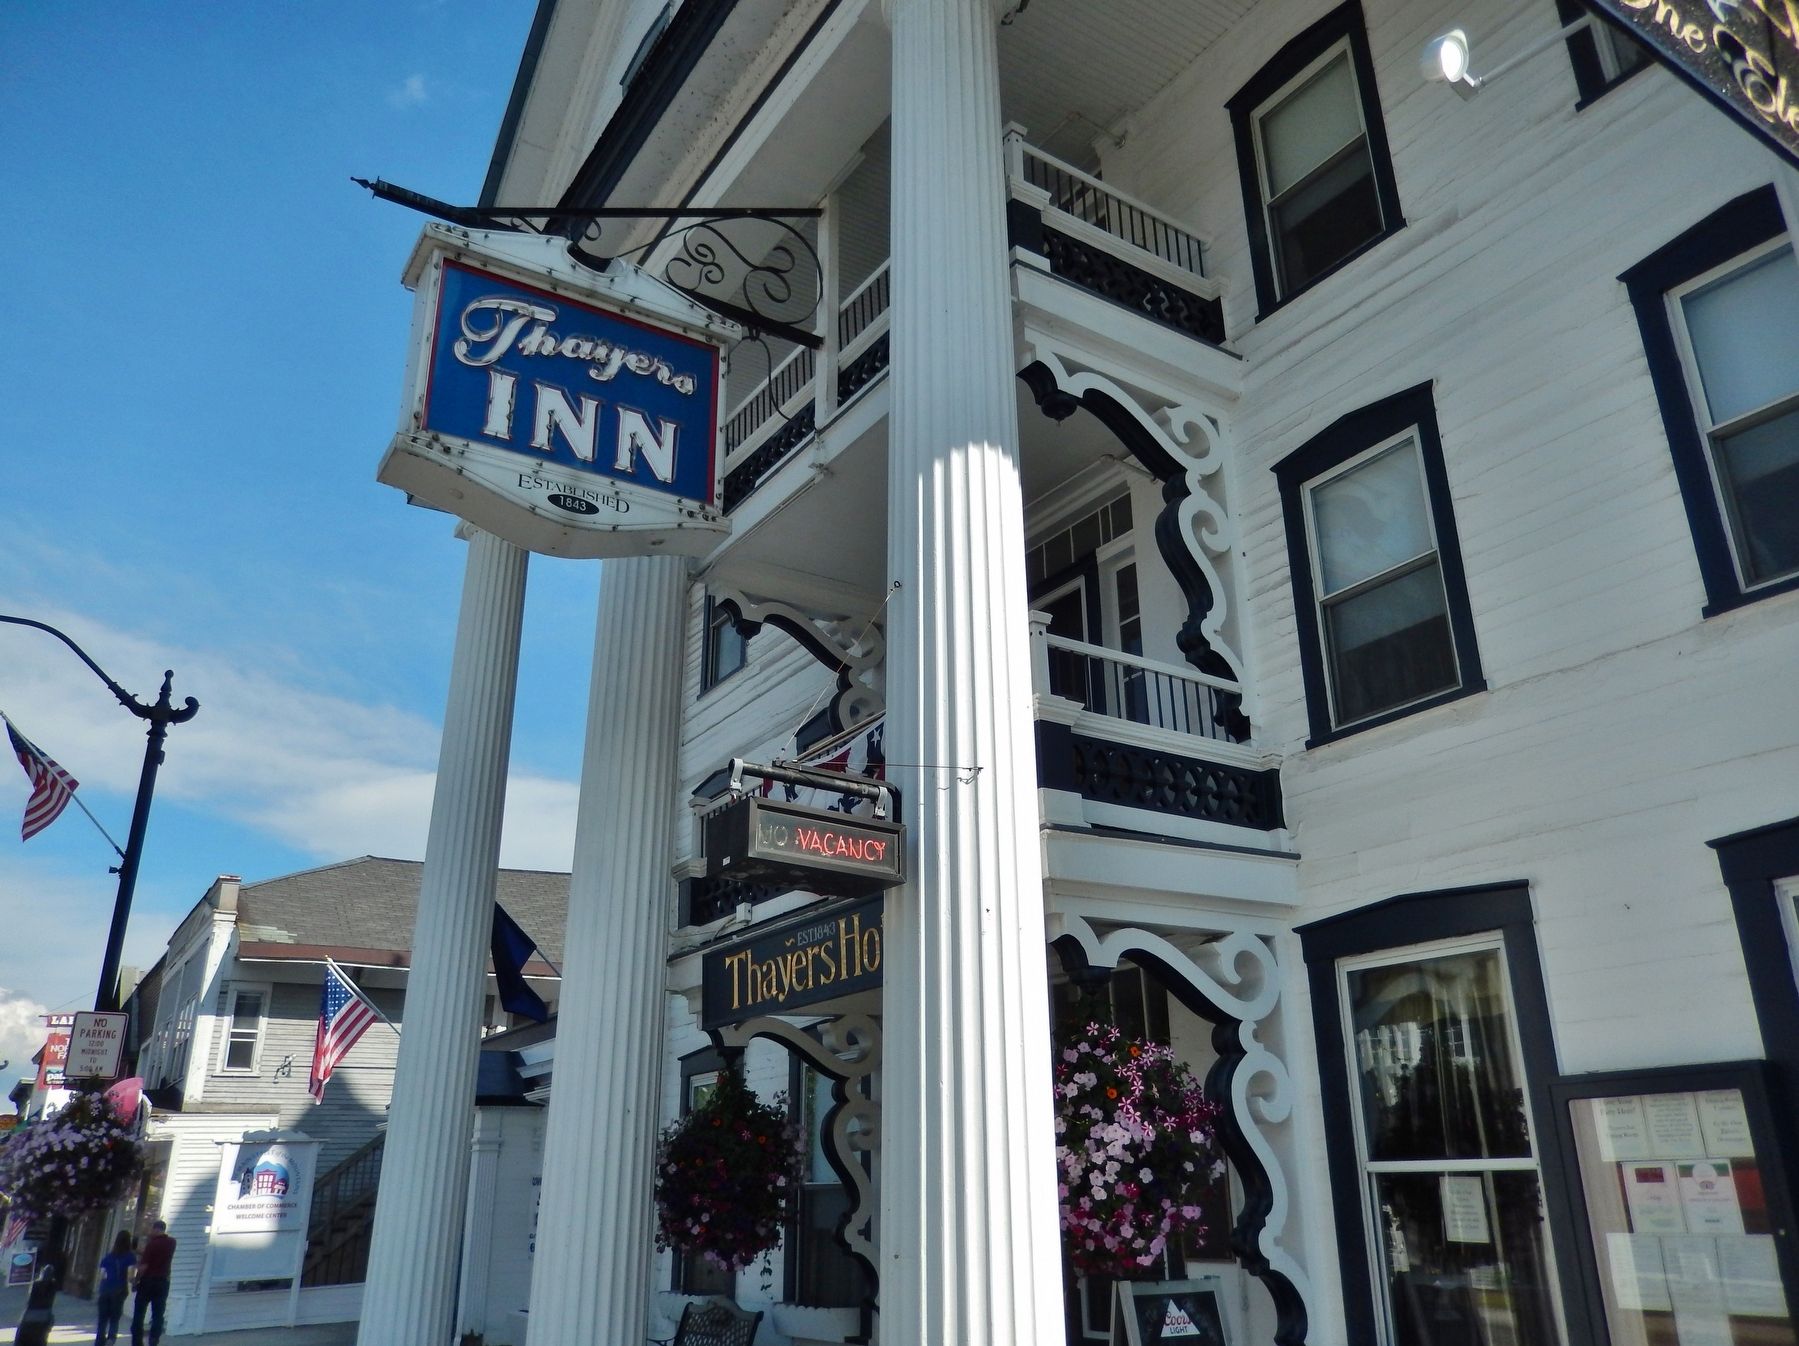 Thayer's Inn Hotel Front (<i>ornate scroll work as described by marker</i>) image. Click for full size.